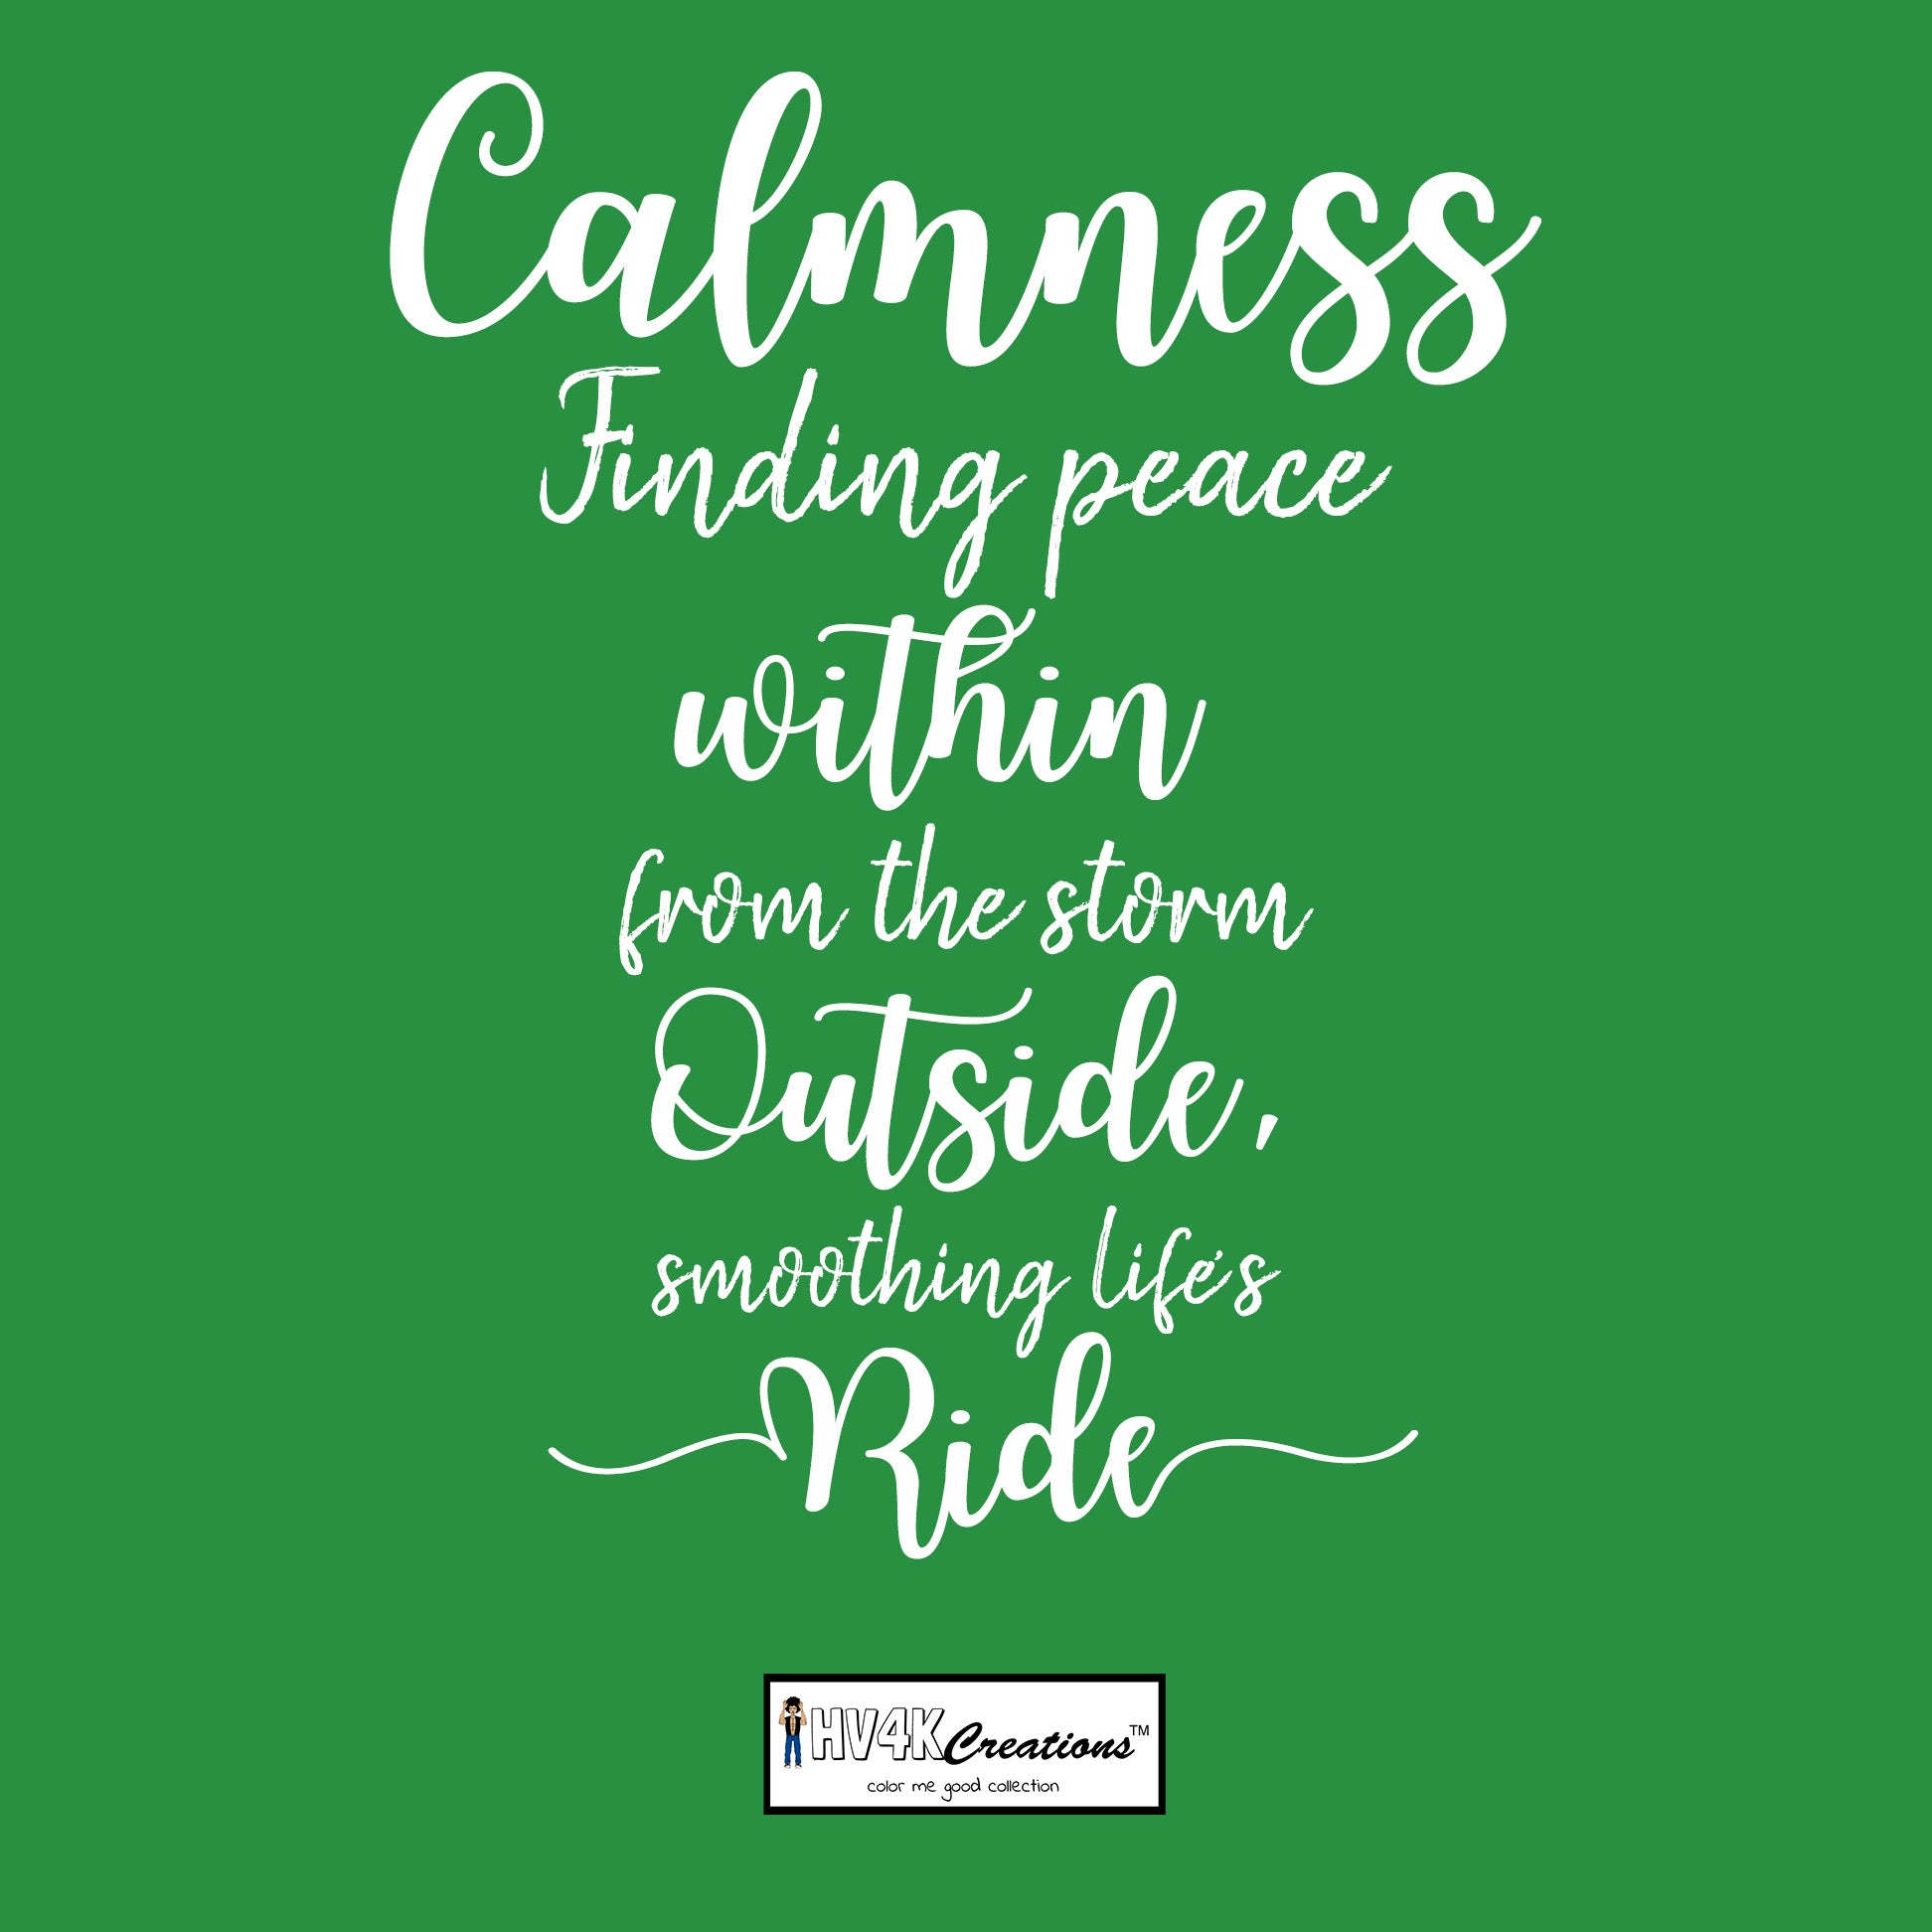 calmness rhyme picture